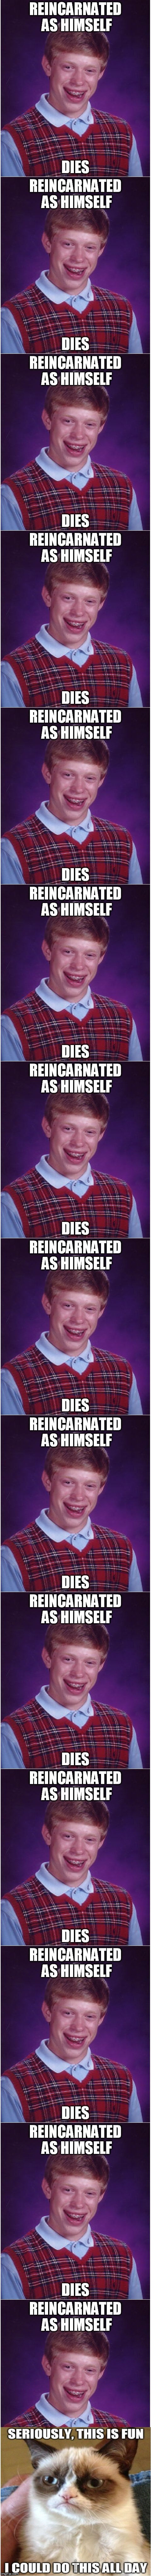 LYNCH1979 you inspired this.  thanks! | SUCKERS, THAT WAS A LONG ONE WASN'T IT? | image tagged in memes,bad luck brian,reincarnation,grumpy cat | made w/ Imgflip meme maker